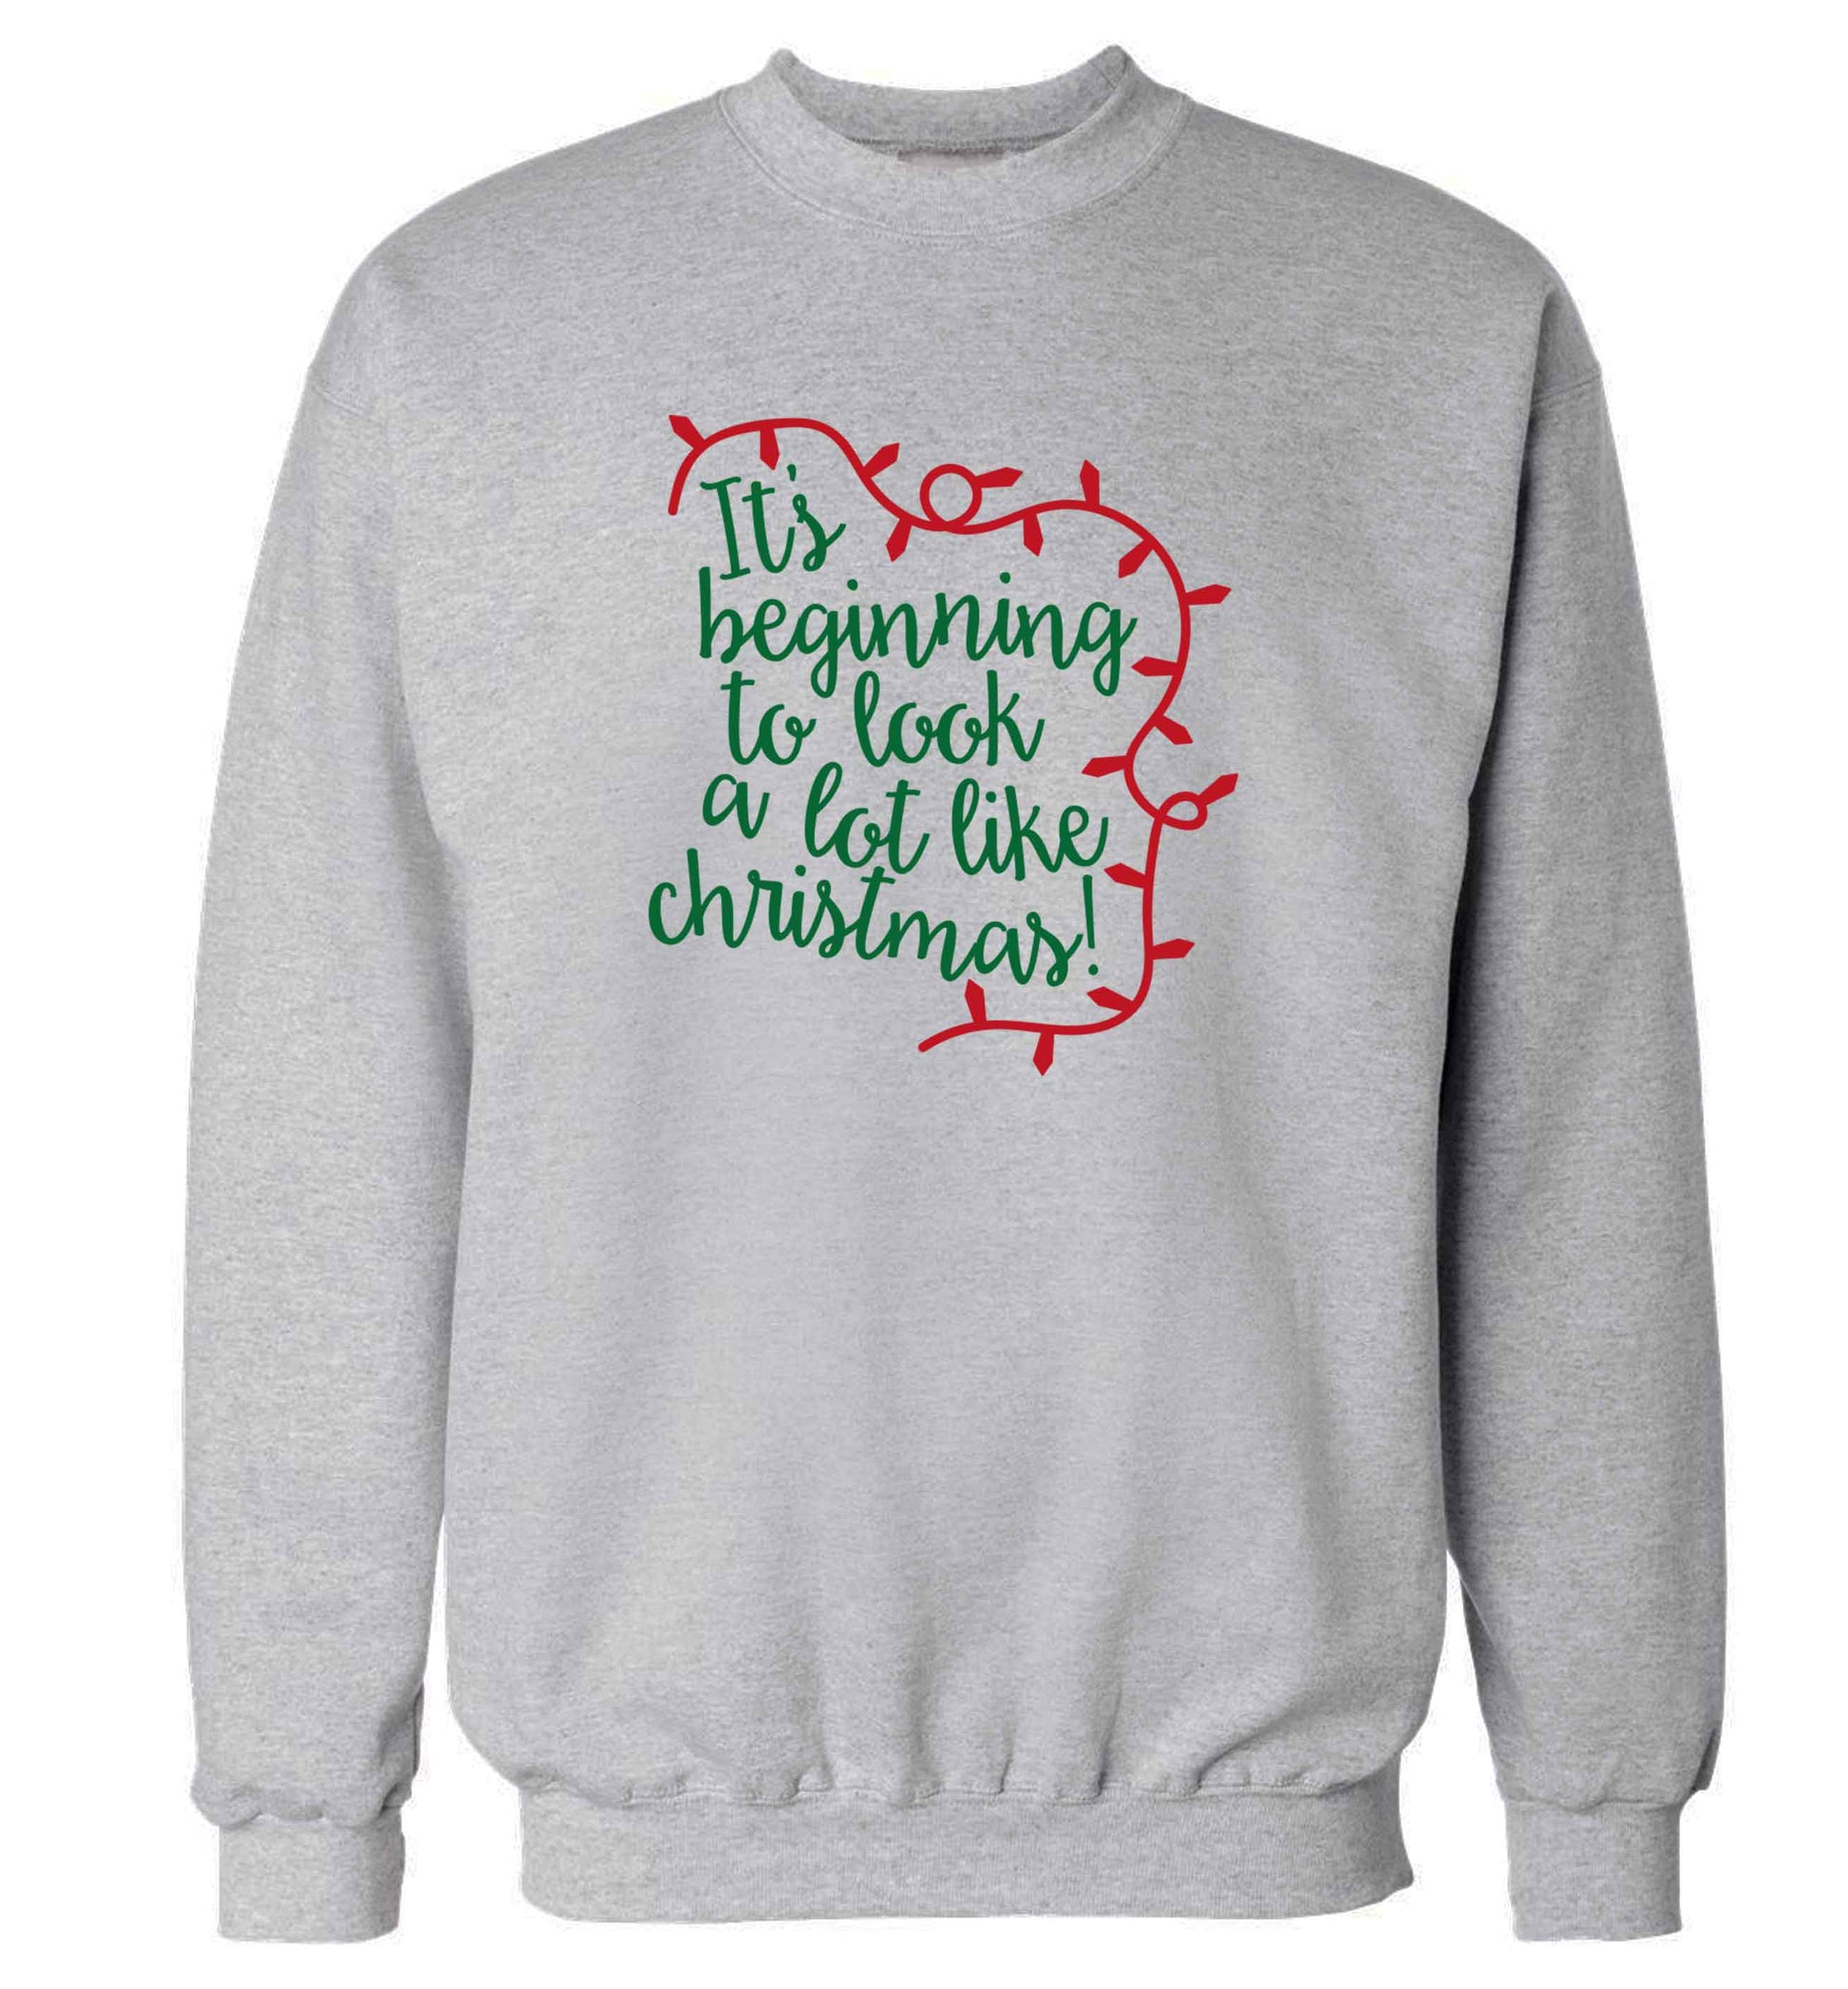 It's beginning to look a lot like Christmas adult's unisex grey sweater 2XL